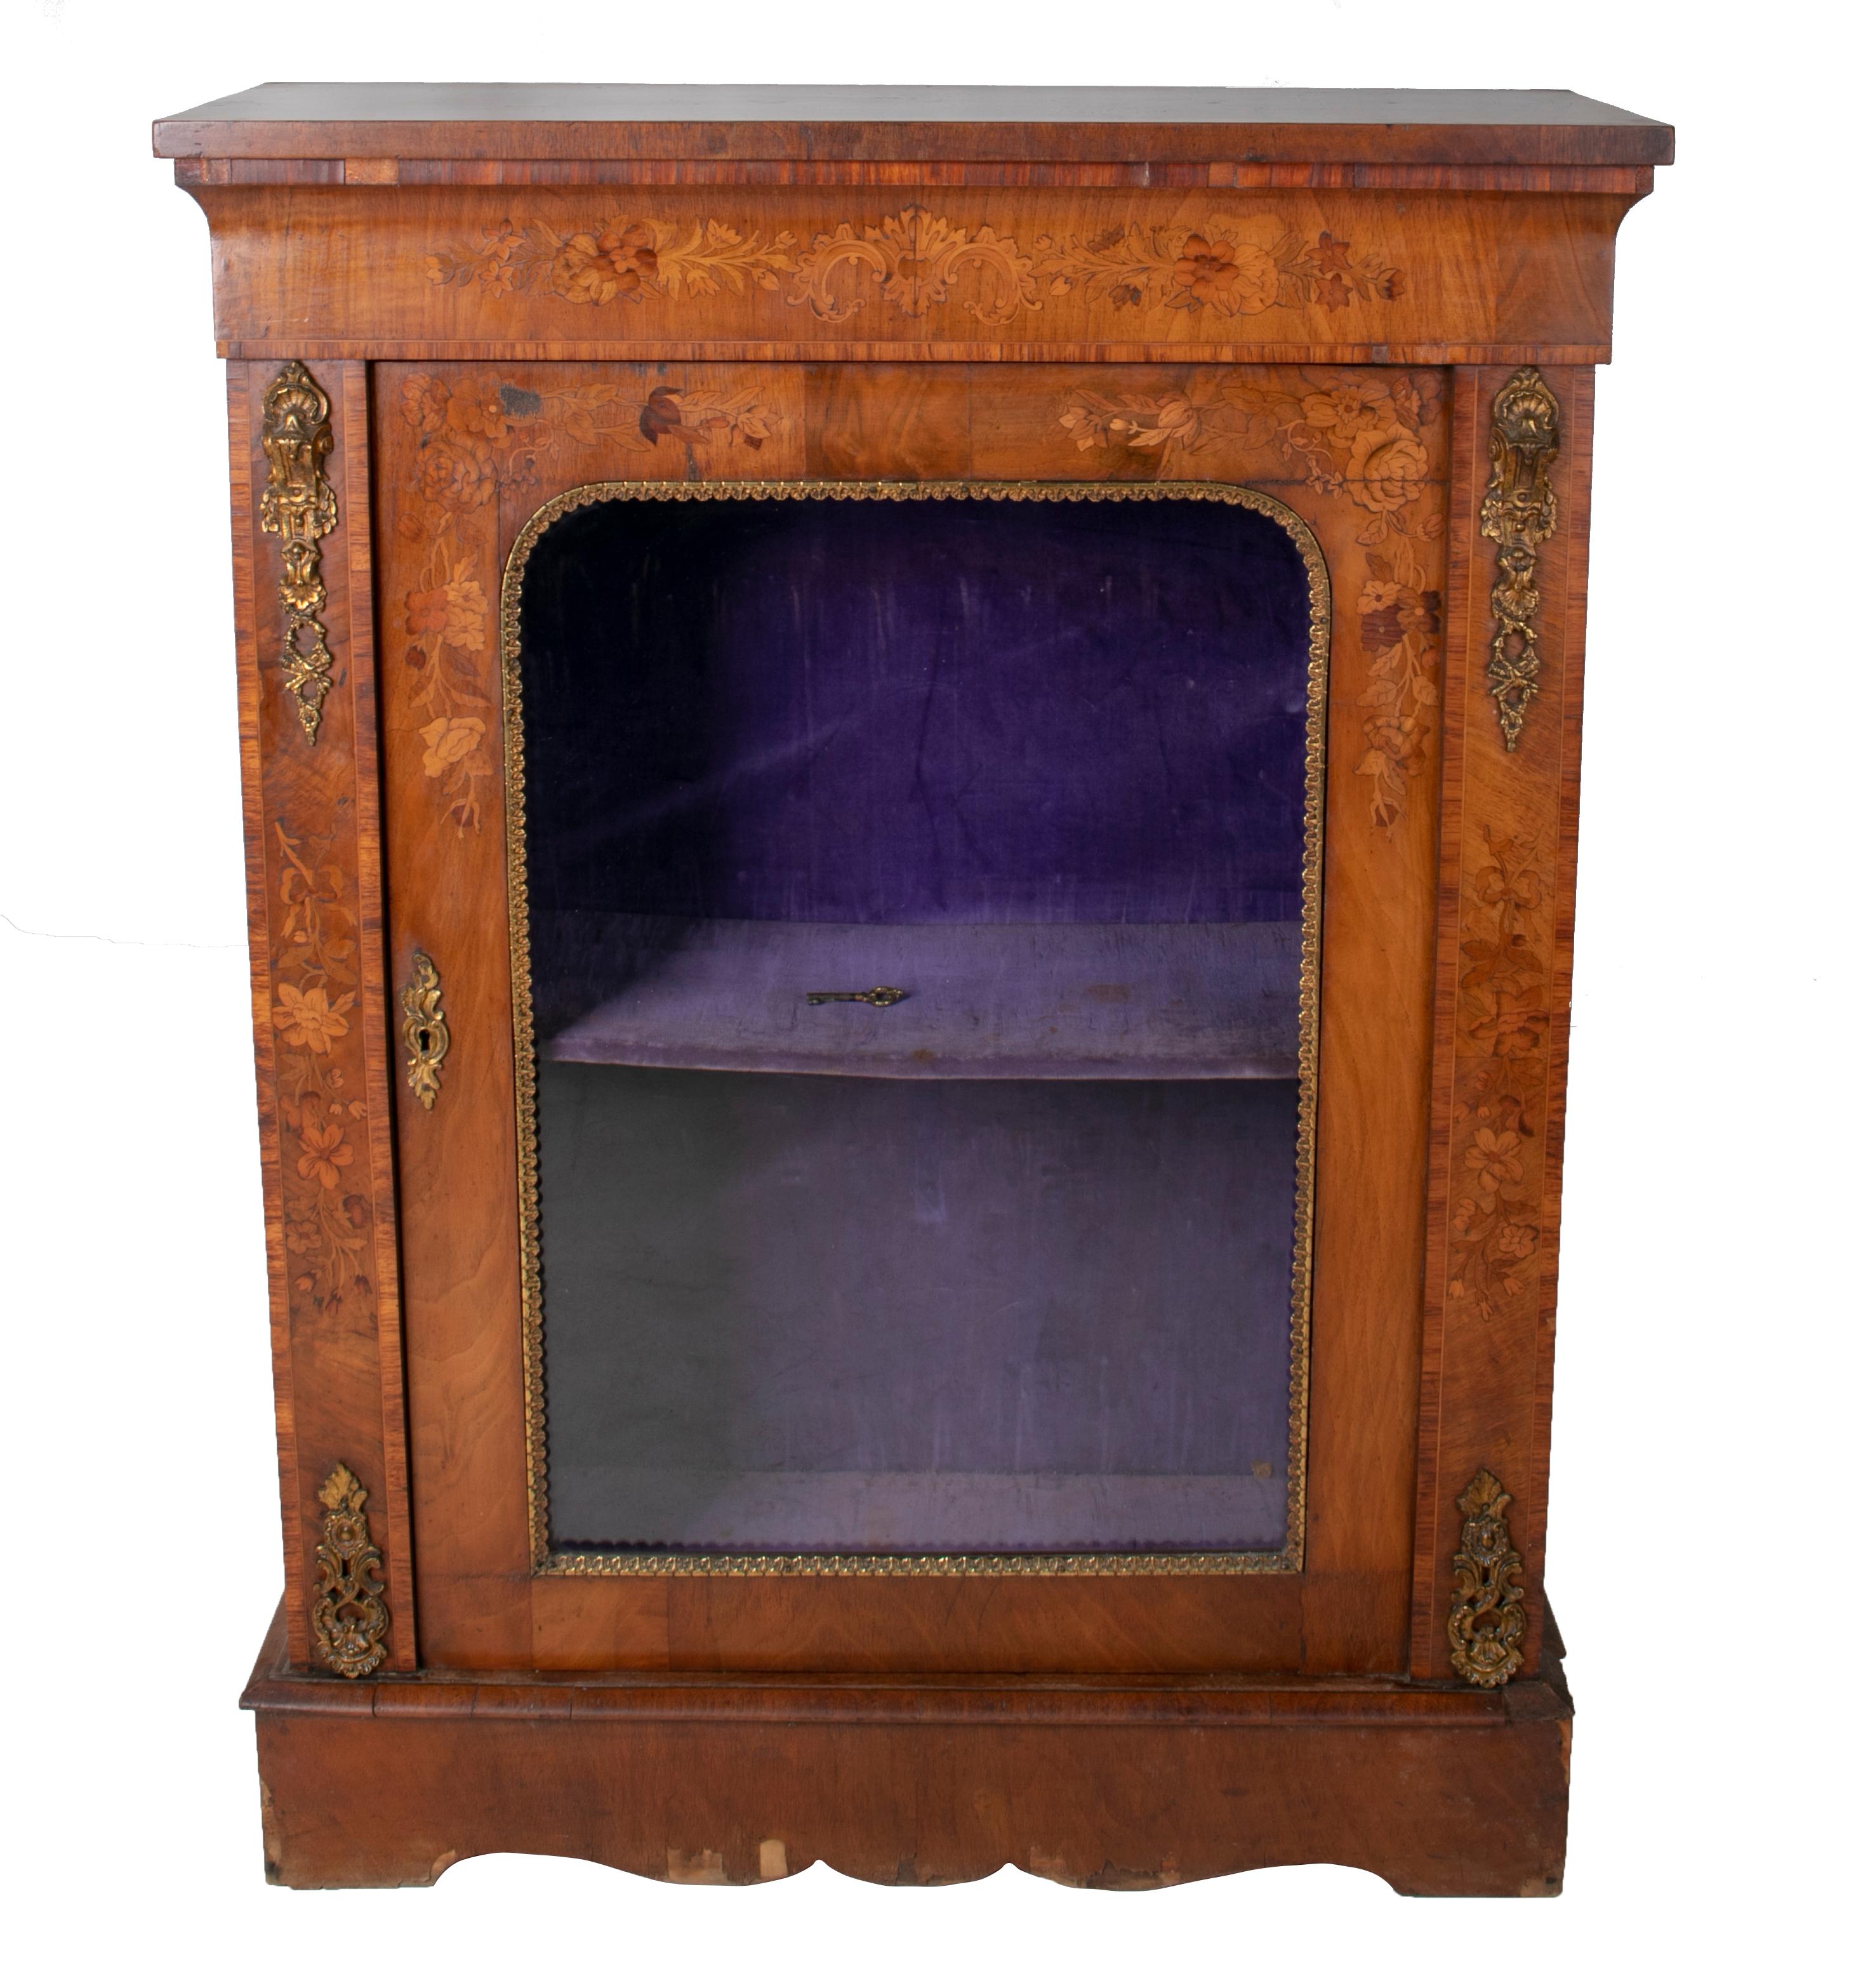 19th century French low wall cabinet with door and bronze fittings.